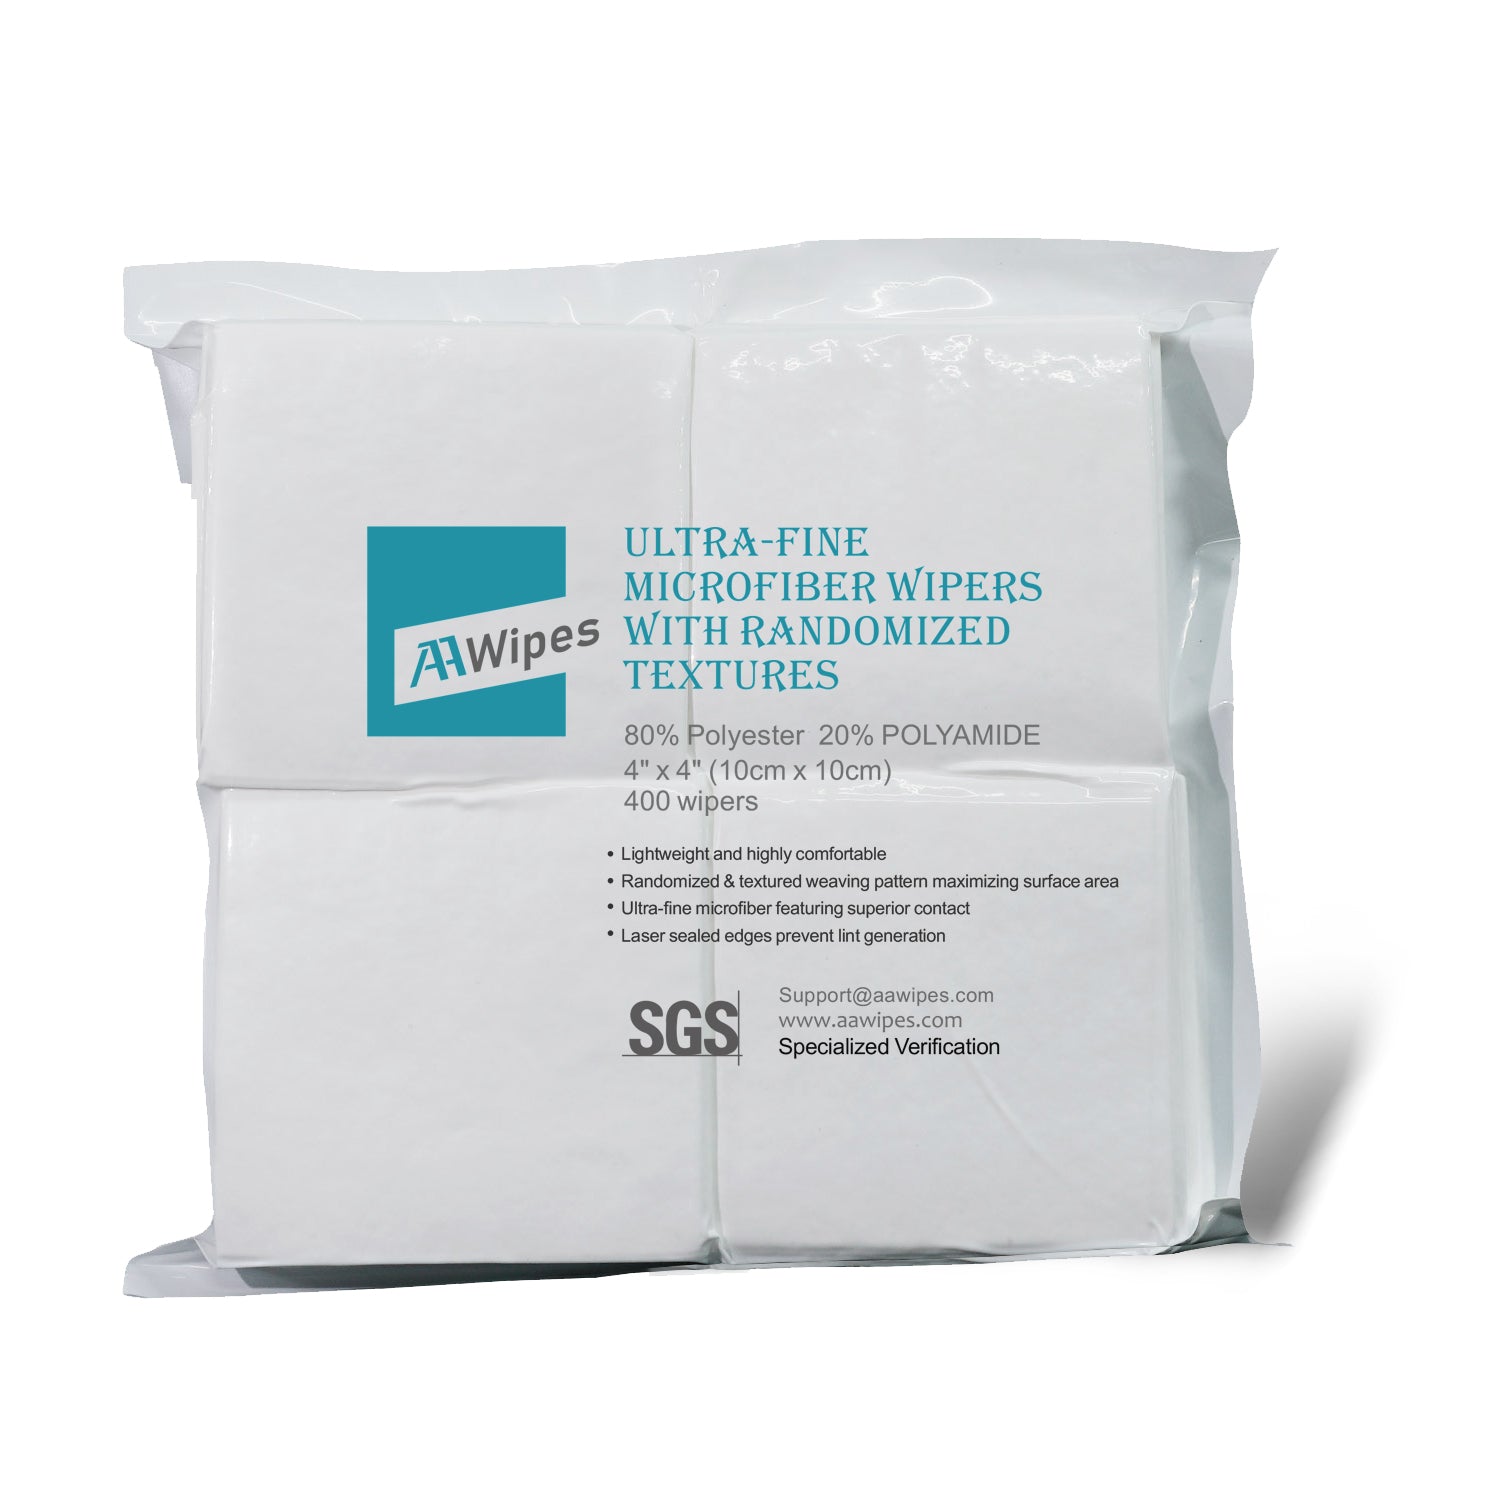 Superfine Microfiber Wipes Irregular Woven Linen 4"x4" (Starting at 1 Box 12,000 Wipes per 30 Bags) (No. MFR14004)